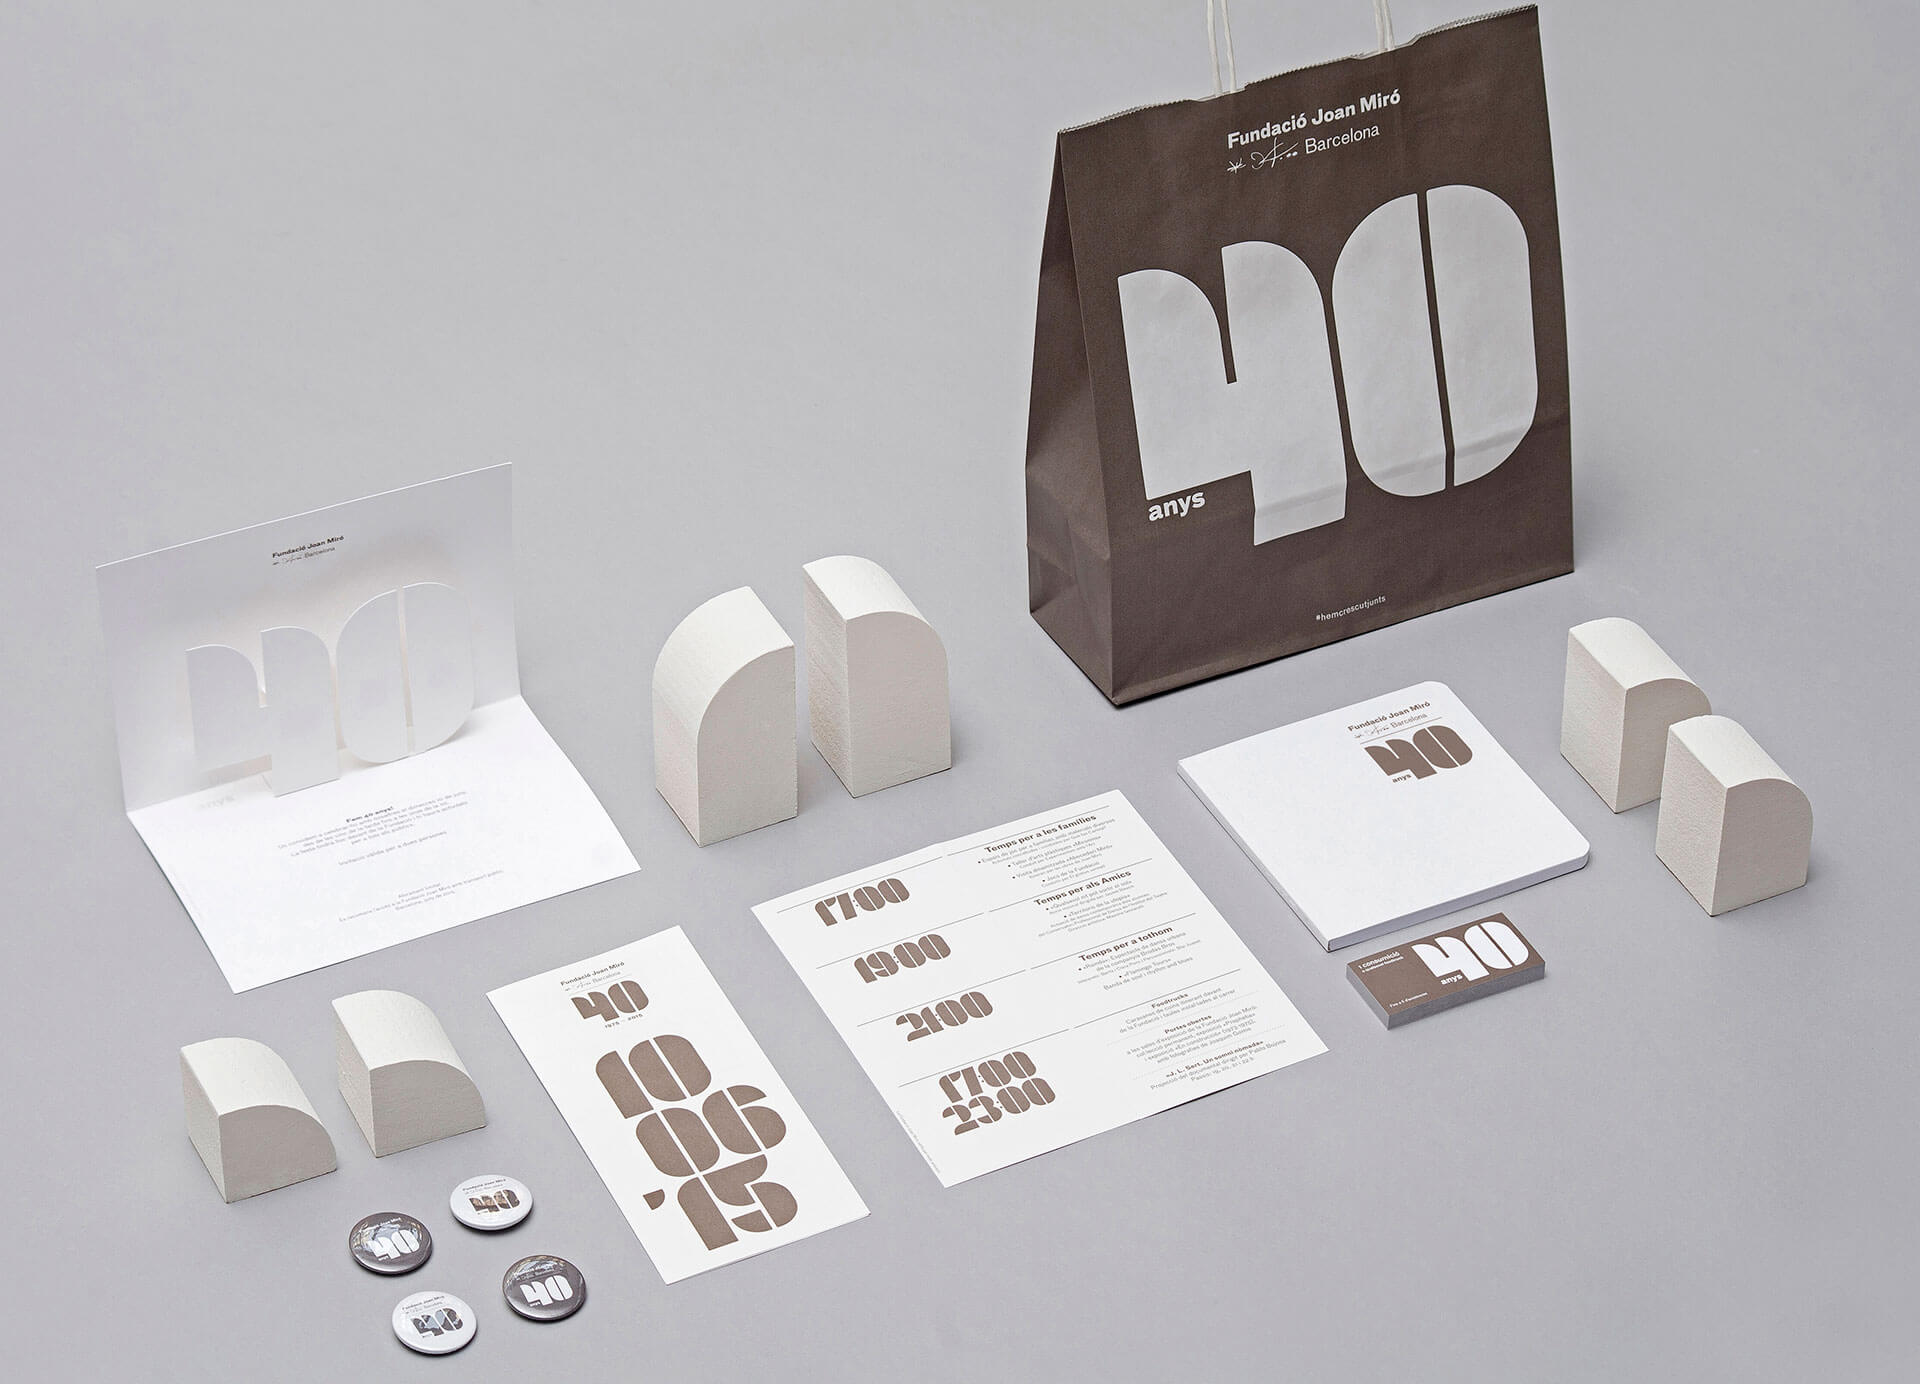 Branding, print and stationery for Fundació Miro's 40th Anniversary by graphic design studio Mucho